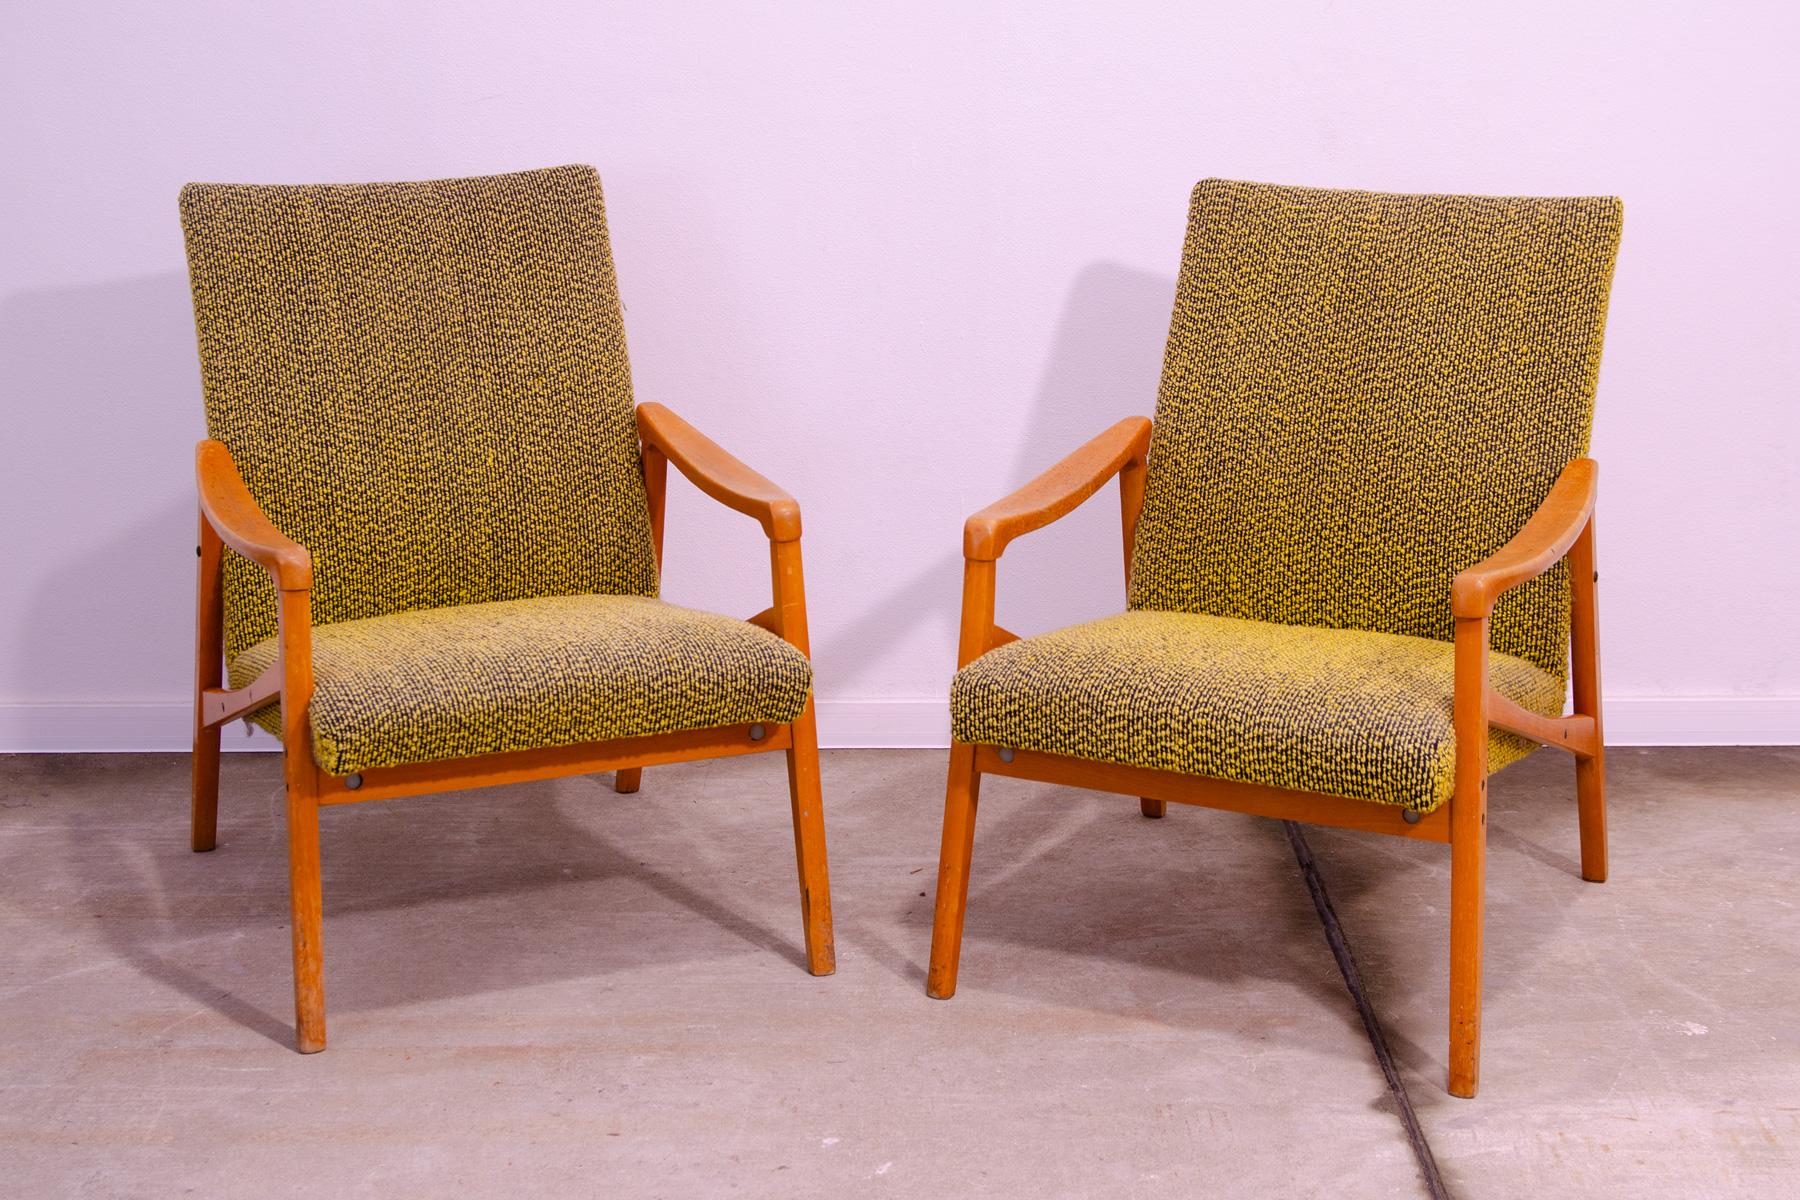 Pair of armchairs, made in the former Czechoslovakia in the 1970´s. It was designed by Jiří Jiroutek for Interiér Praha as part of U-550 living room set. The structure is made of beech wood and the chairs have original upholstery. The chairs are in